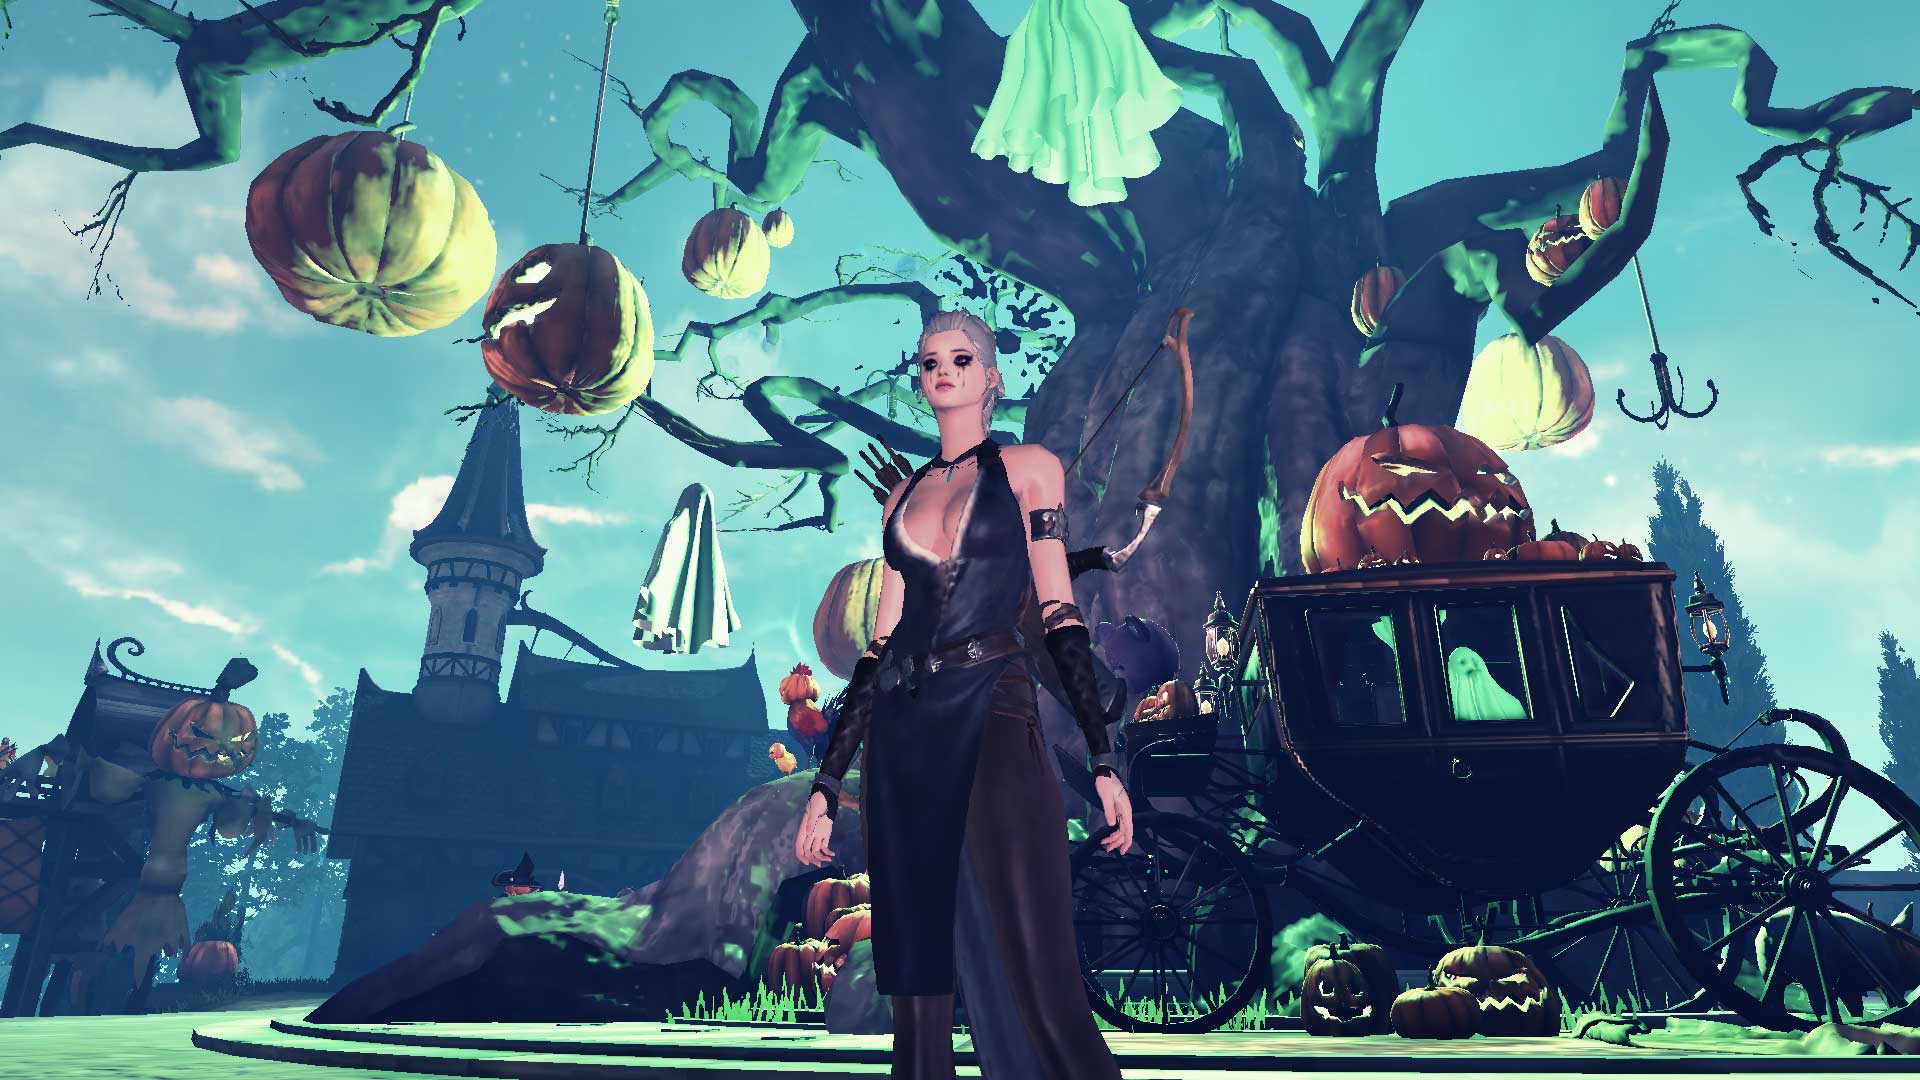 Helvetica in Astellia Online stands in front of a giant gnarled tree. It is adorned with jack o'latnerns hanging from rope, ghosts made of sheets and a hooked anchor.